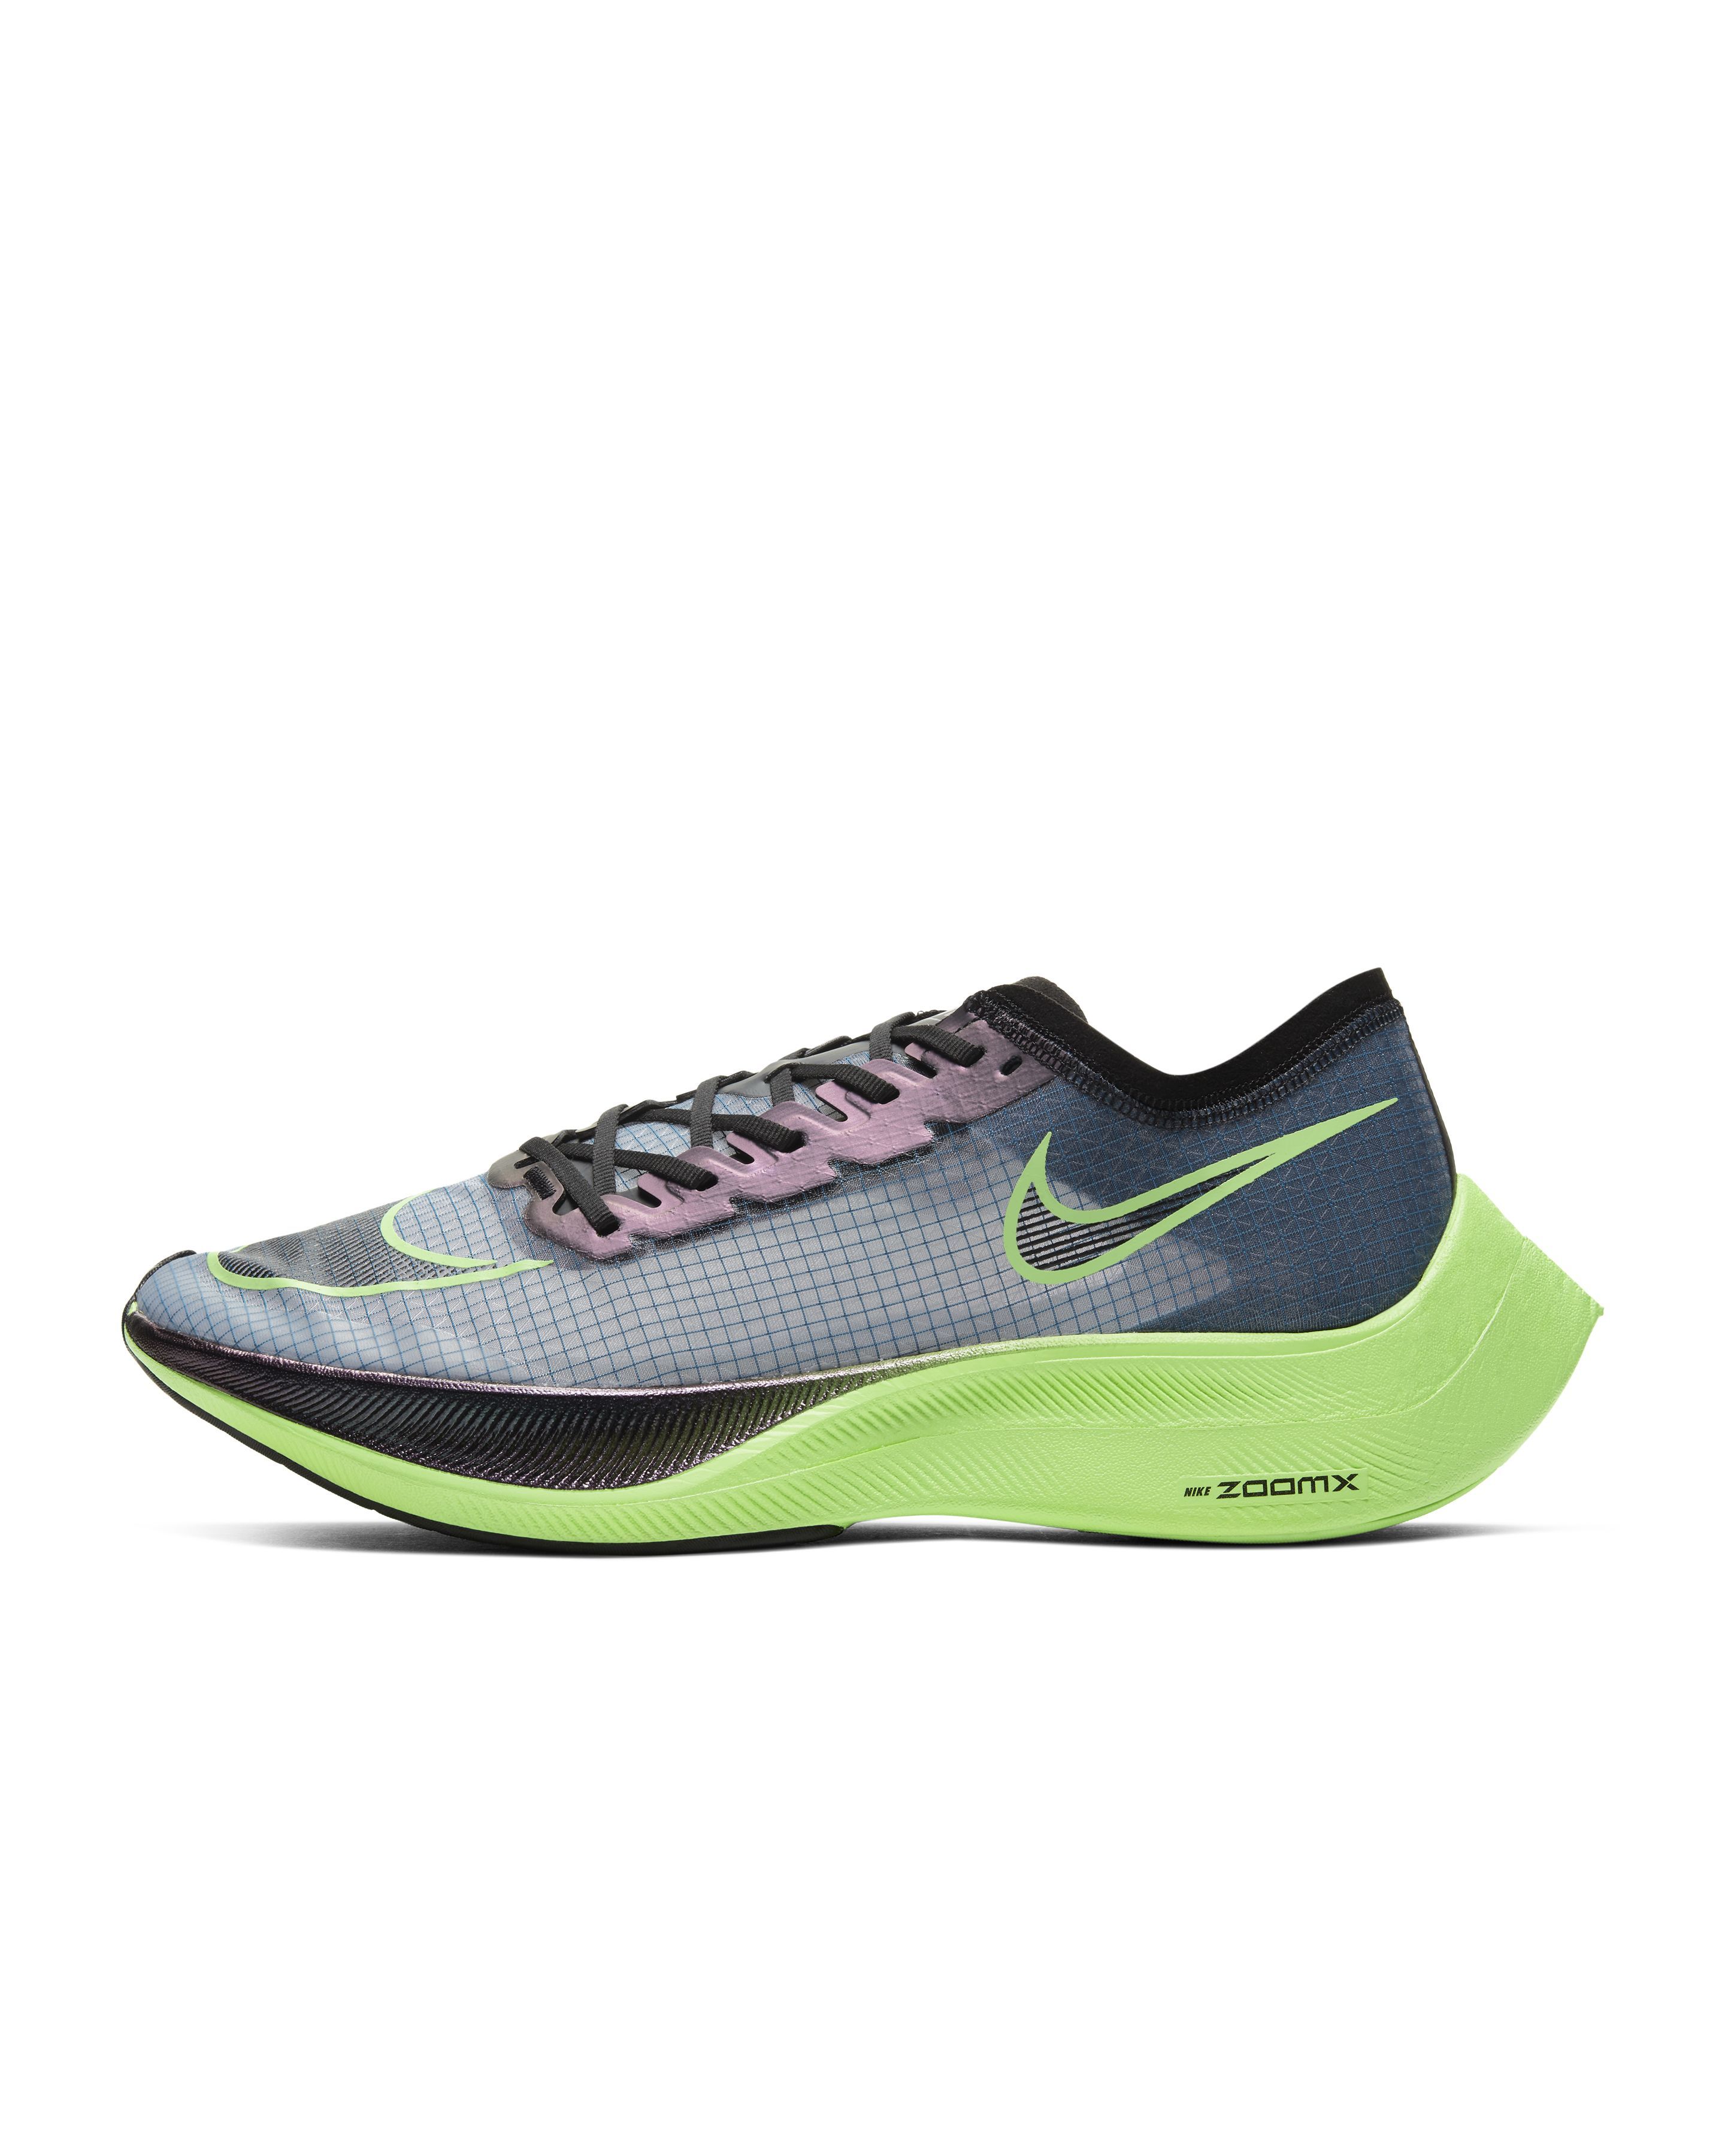 nike zoomx running shoes